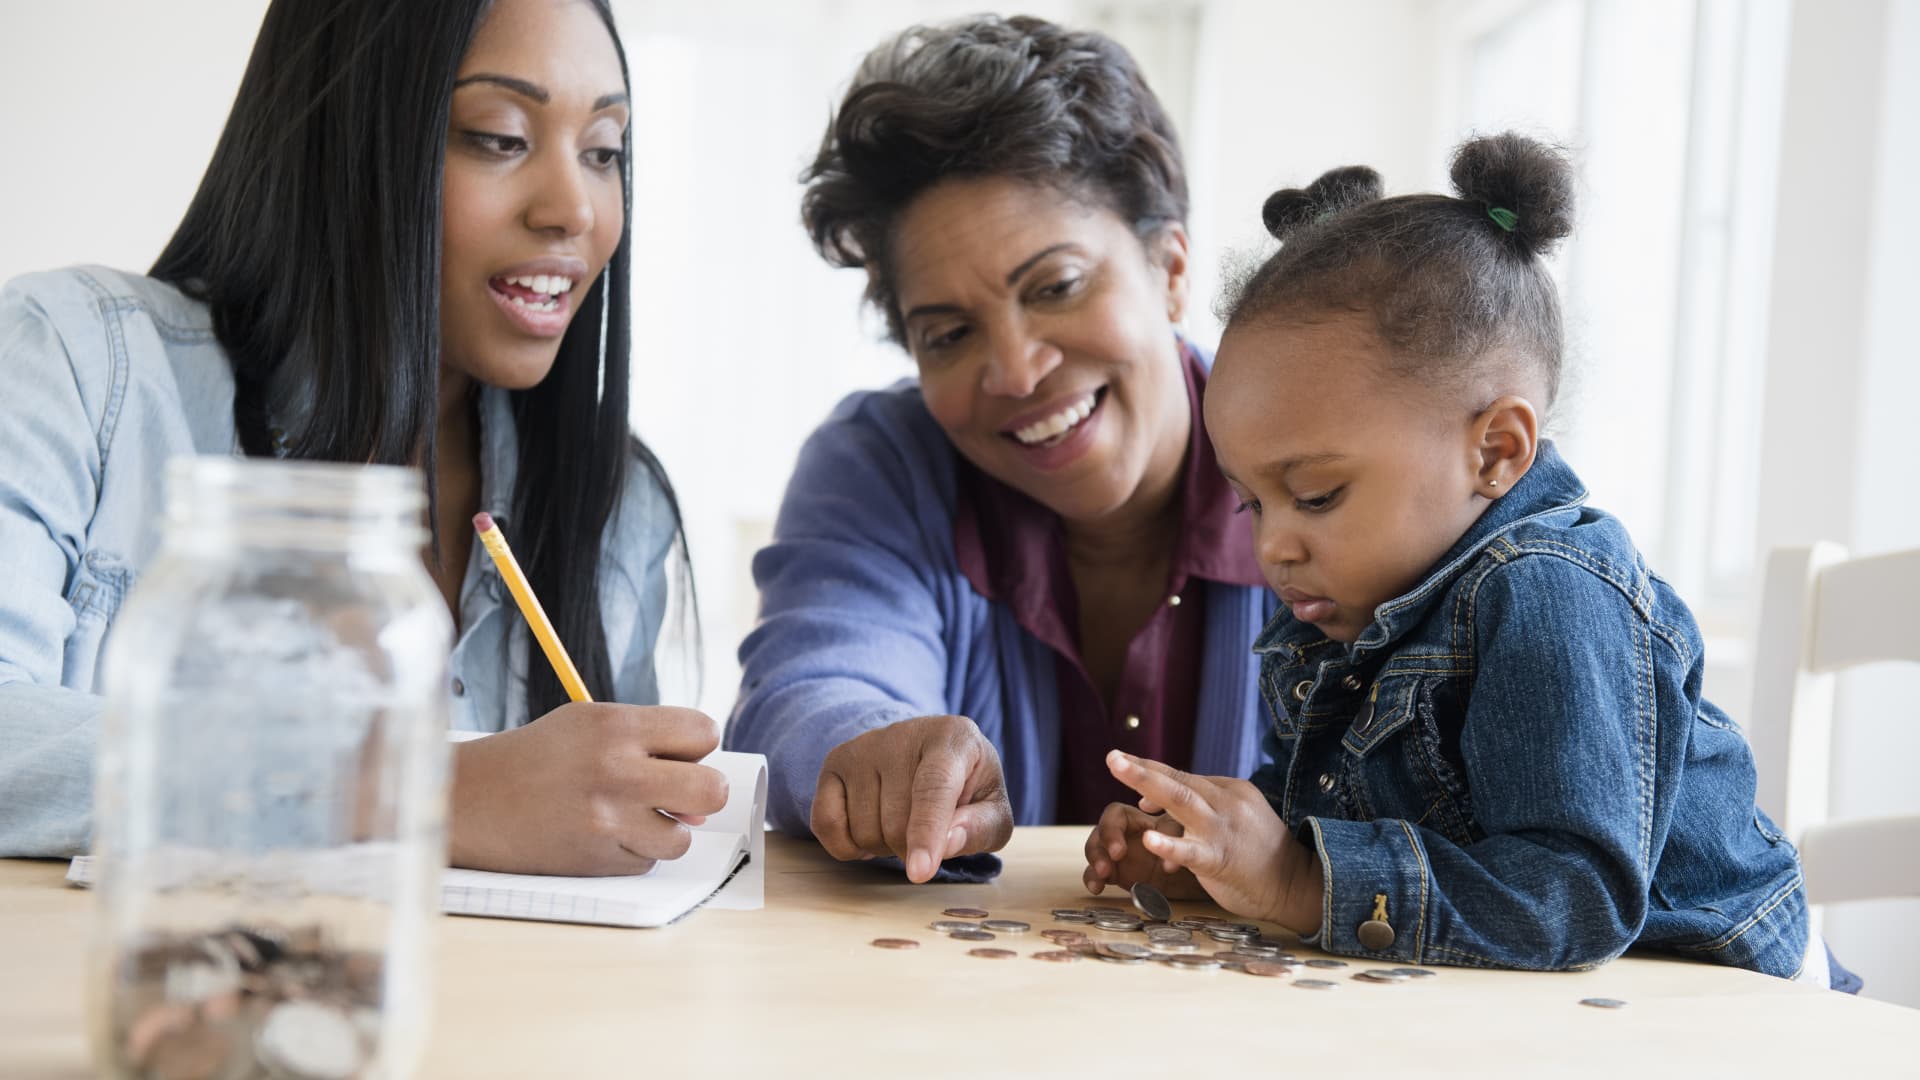 How parents can empower their kids through financial literacy